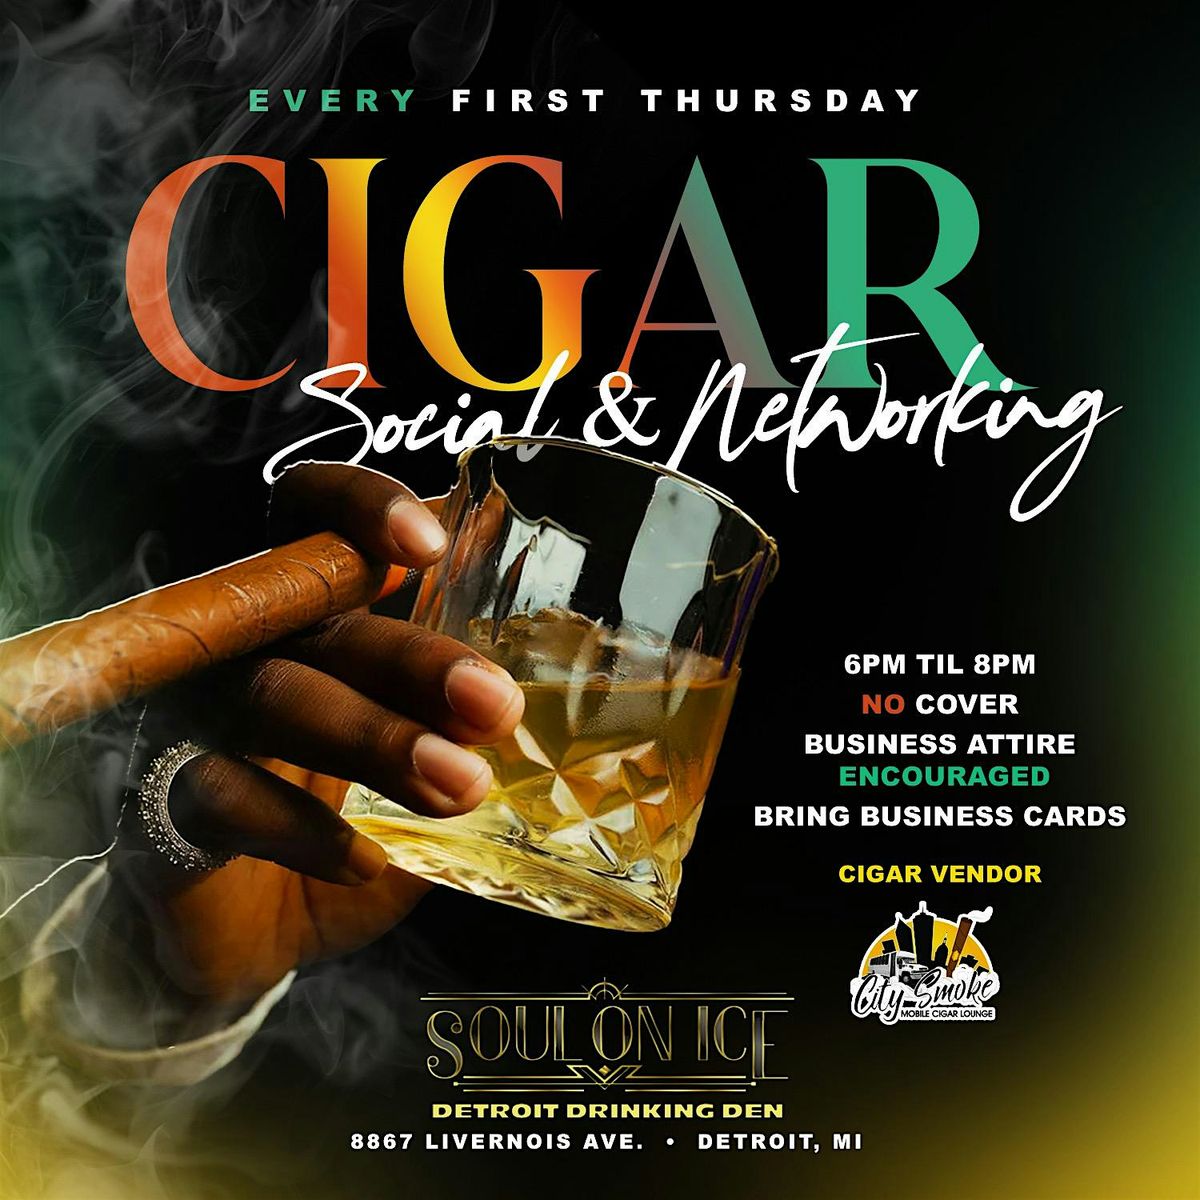 Cigar Social and Networking